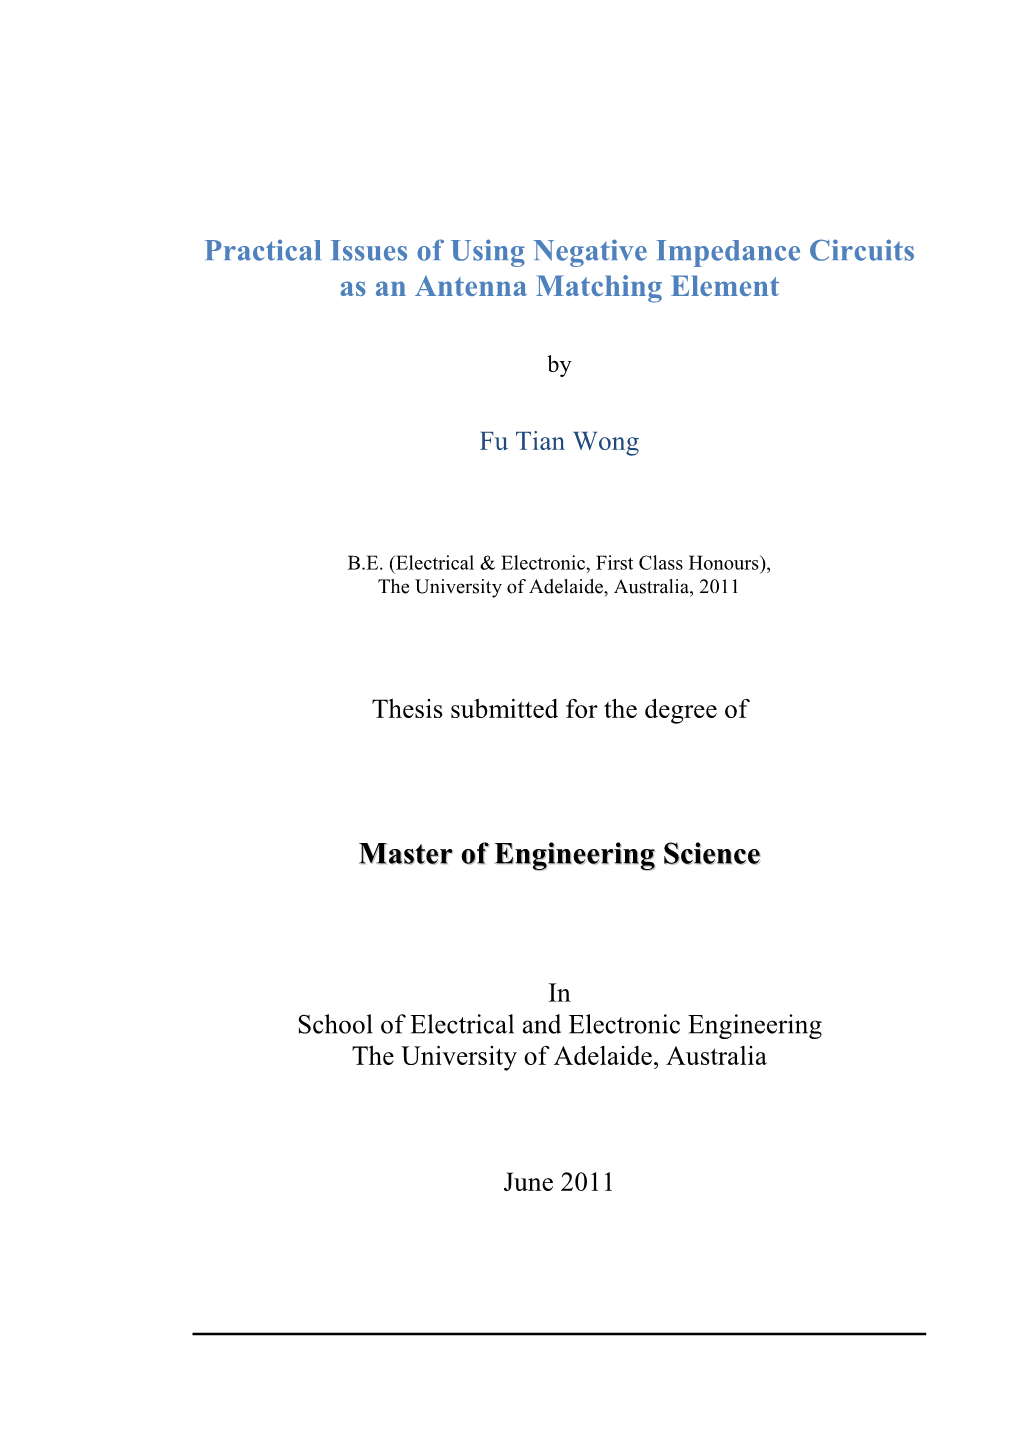 Practical Issues of Using Negative Impedance Circuits As an Antenna Matching Element